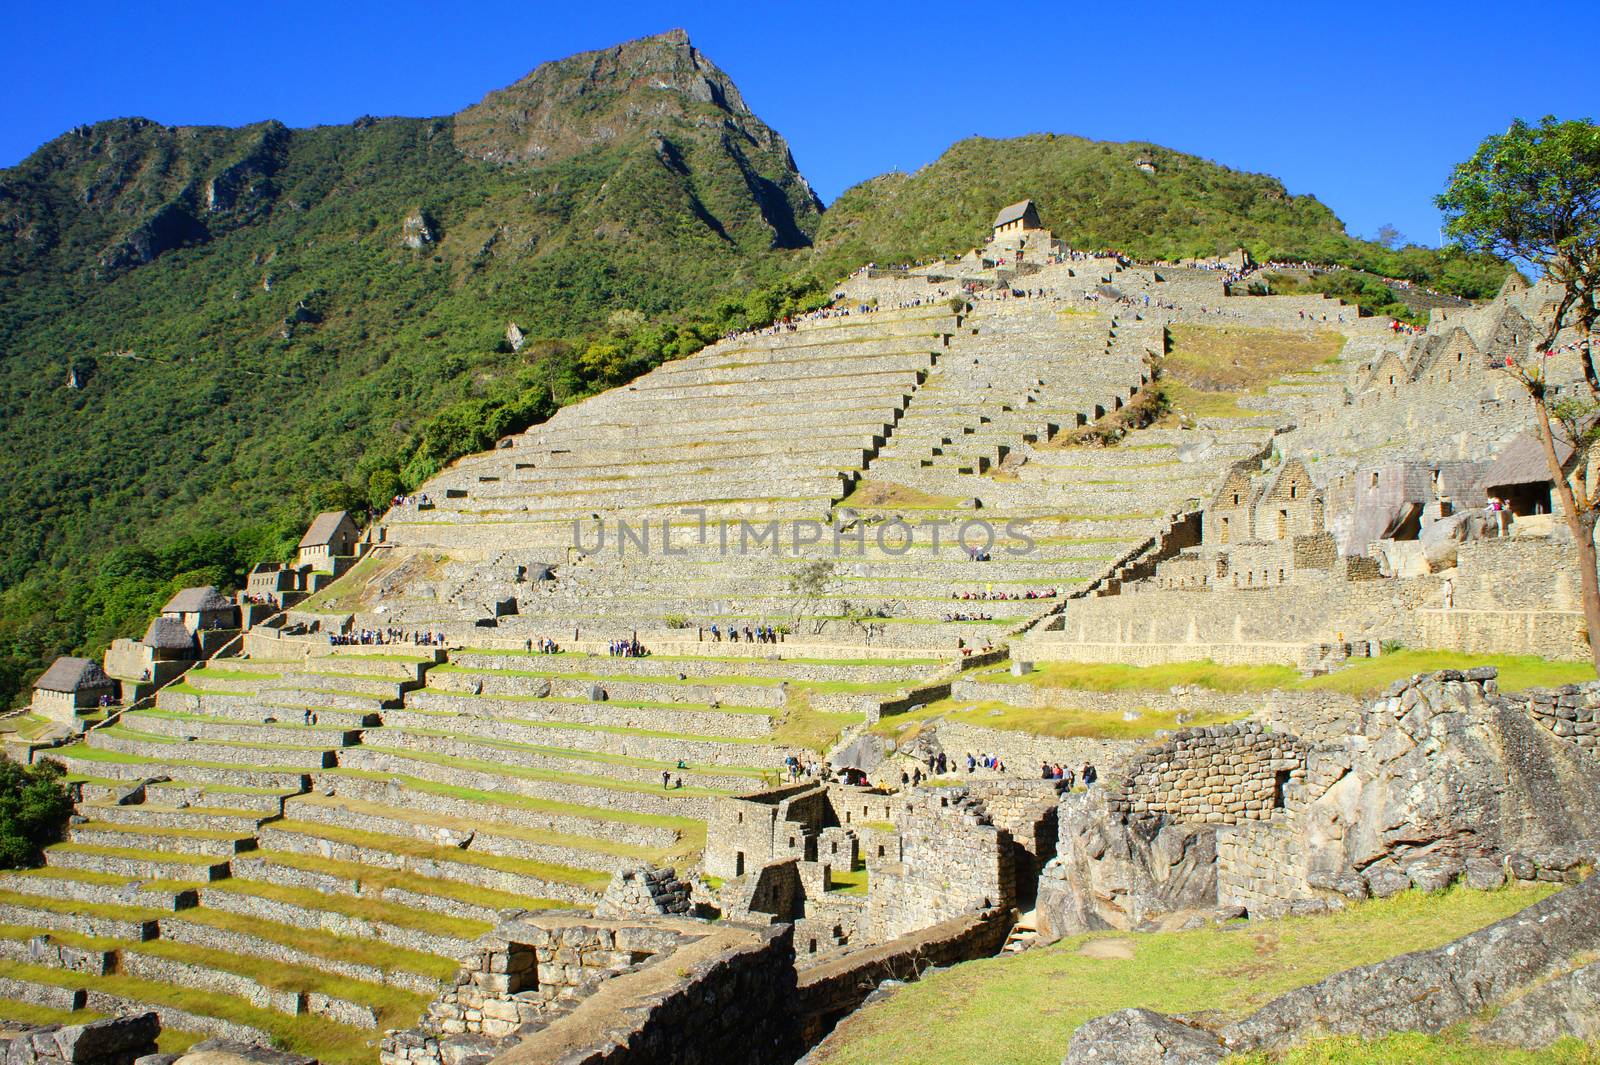 Terraces used for farming by Incans at Machu Picchu